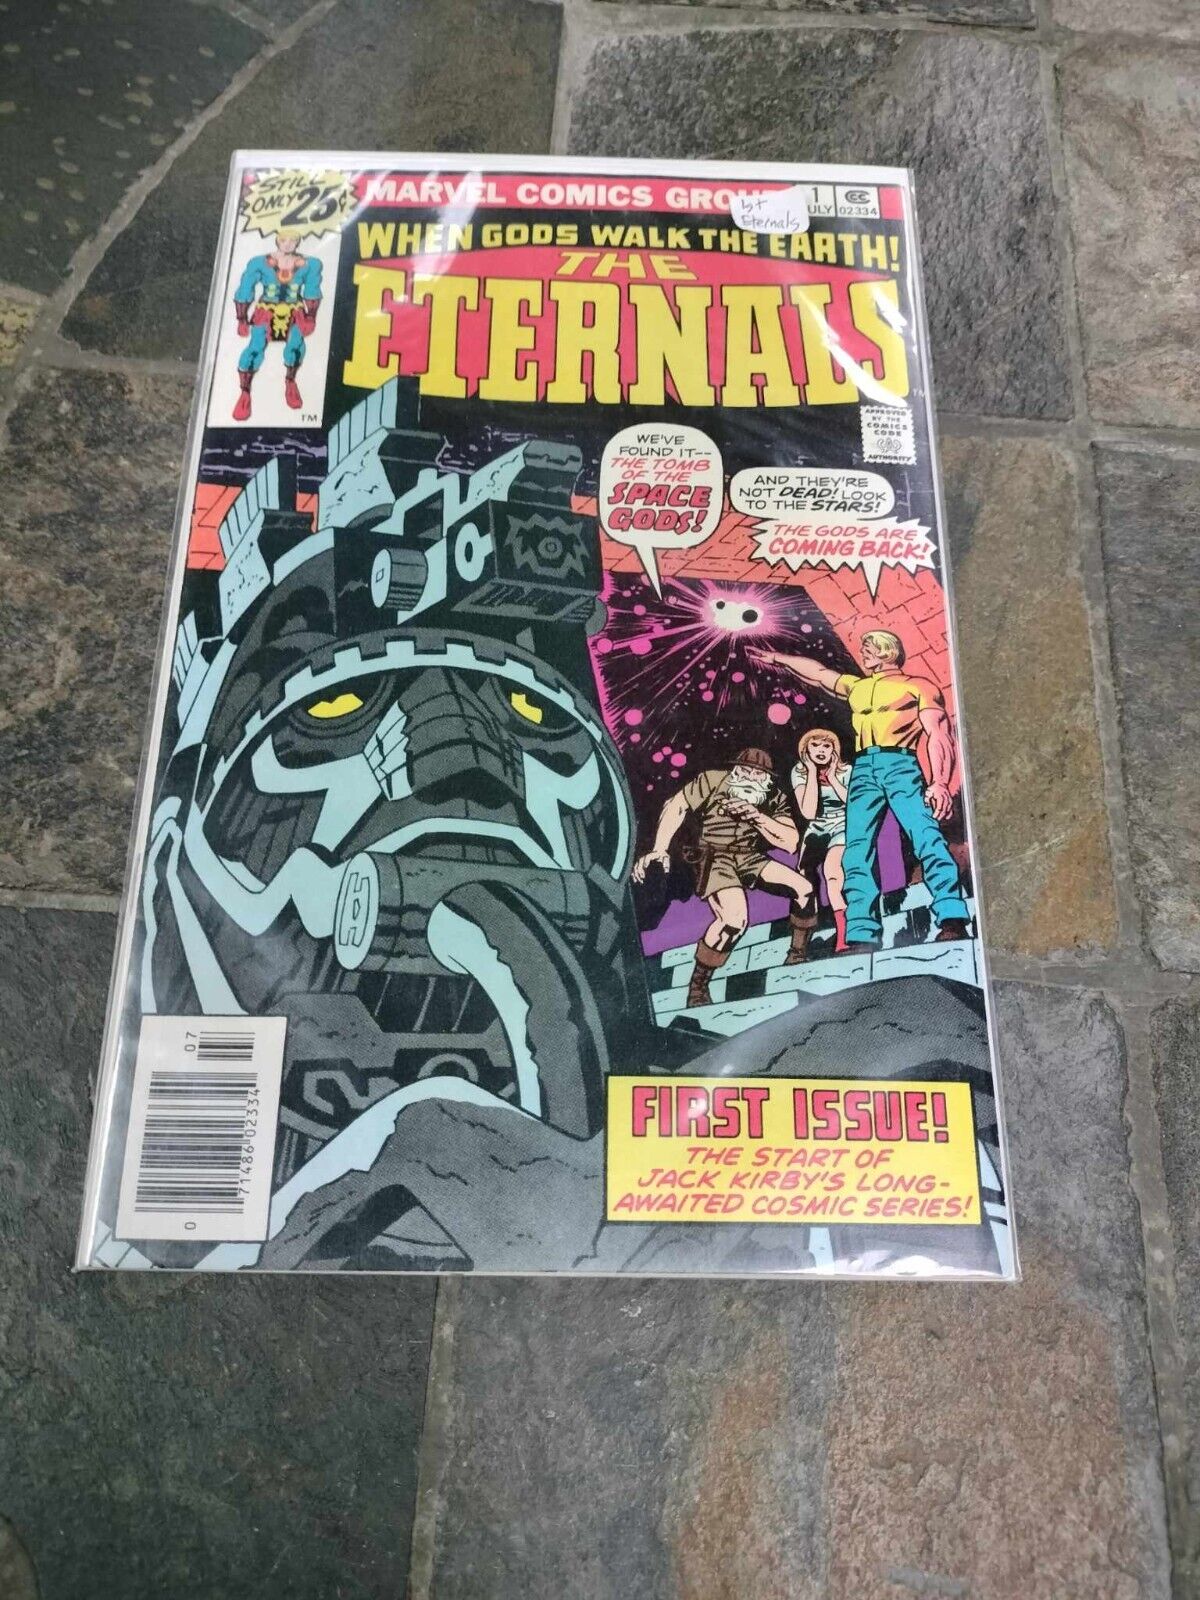 THE ETERNALS #1 Comic Book 1976 Jack Kirby 1st Appearance of the Eternals